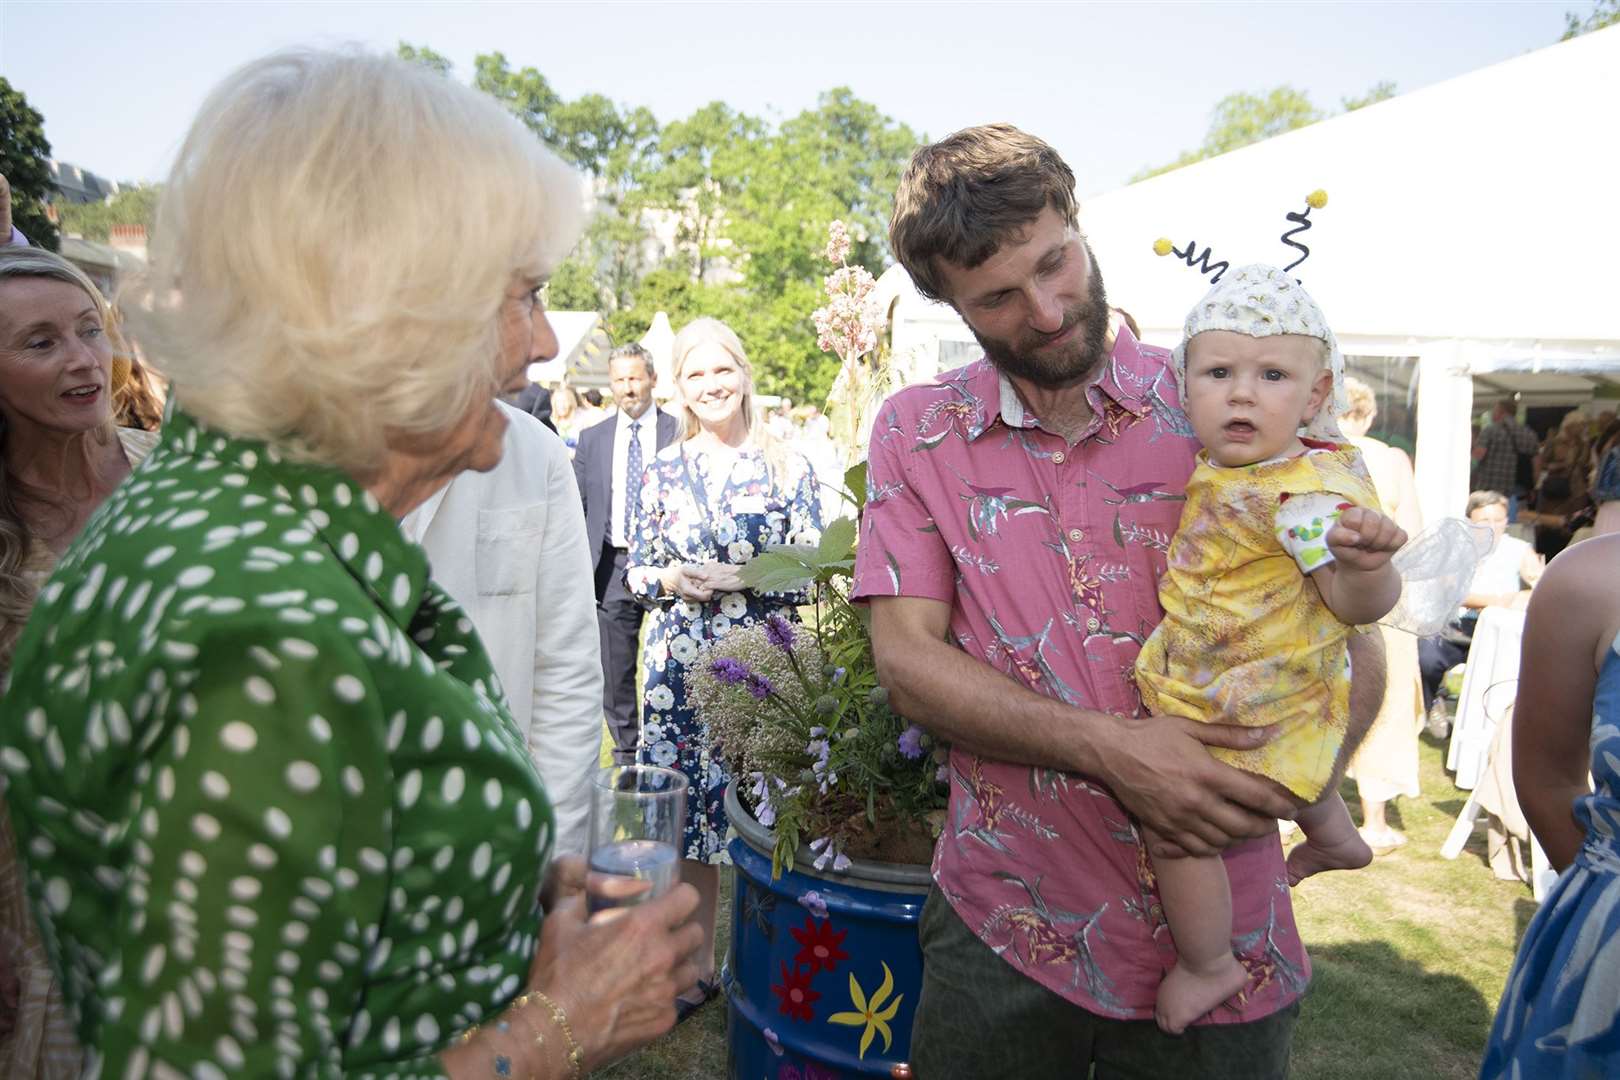 Camilla greeted nine-month-old Ota Rowan Zika who was sporting a bee costume (Eddie Mulholland/Daily Telegraph/PA)